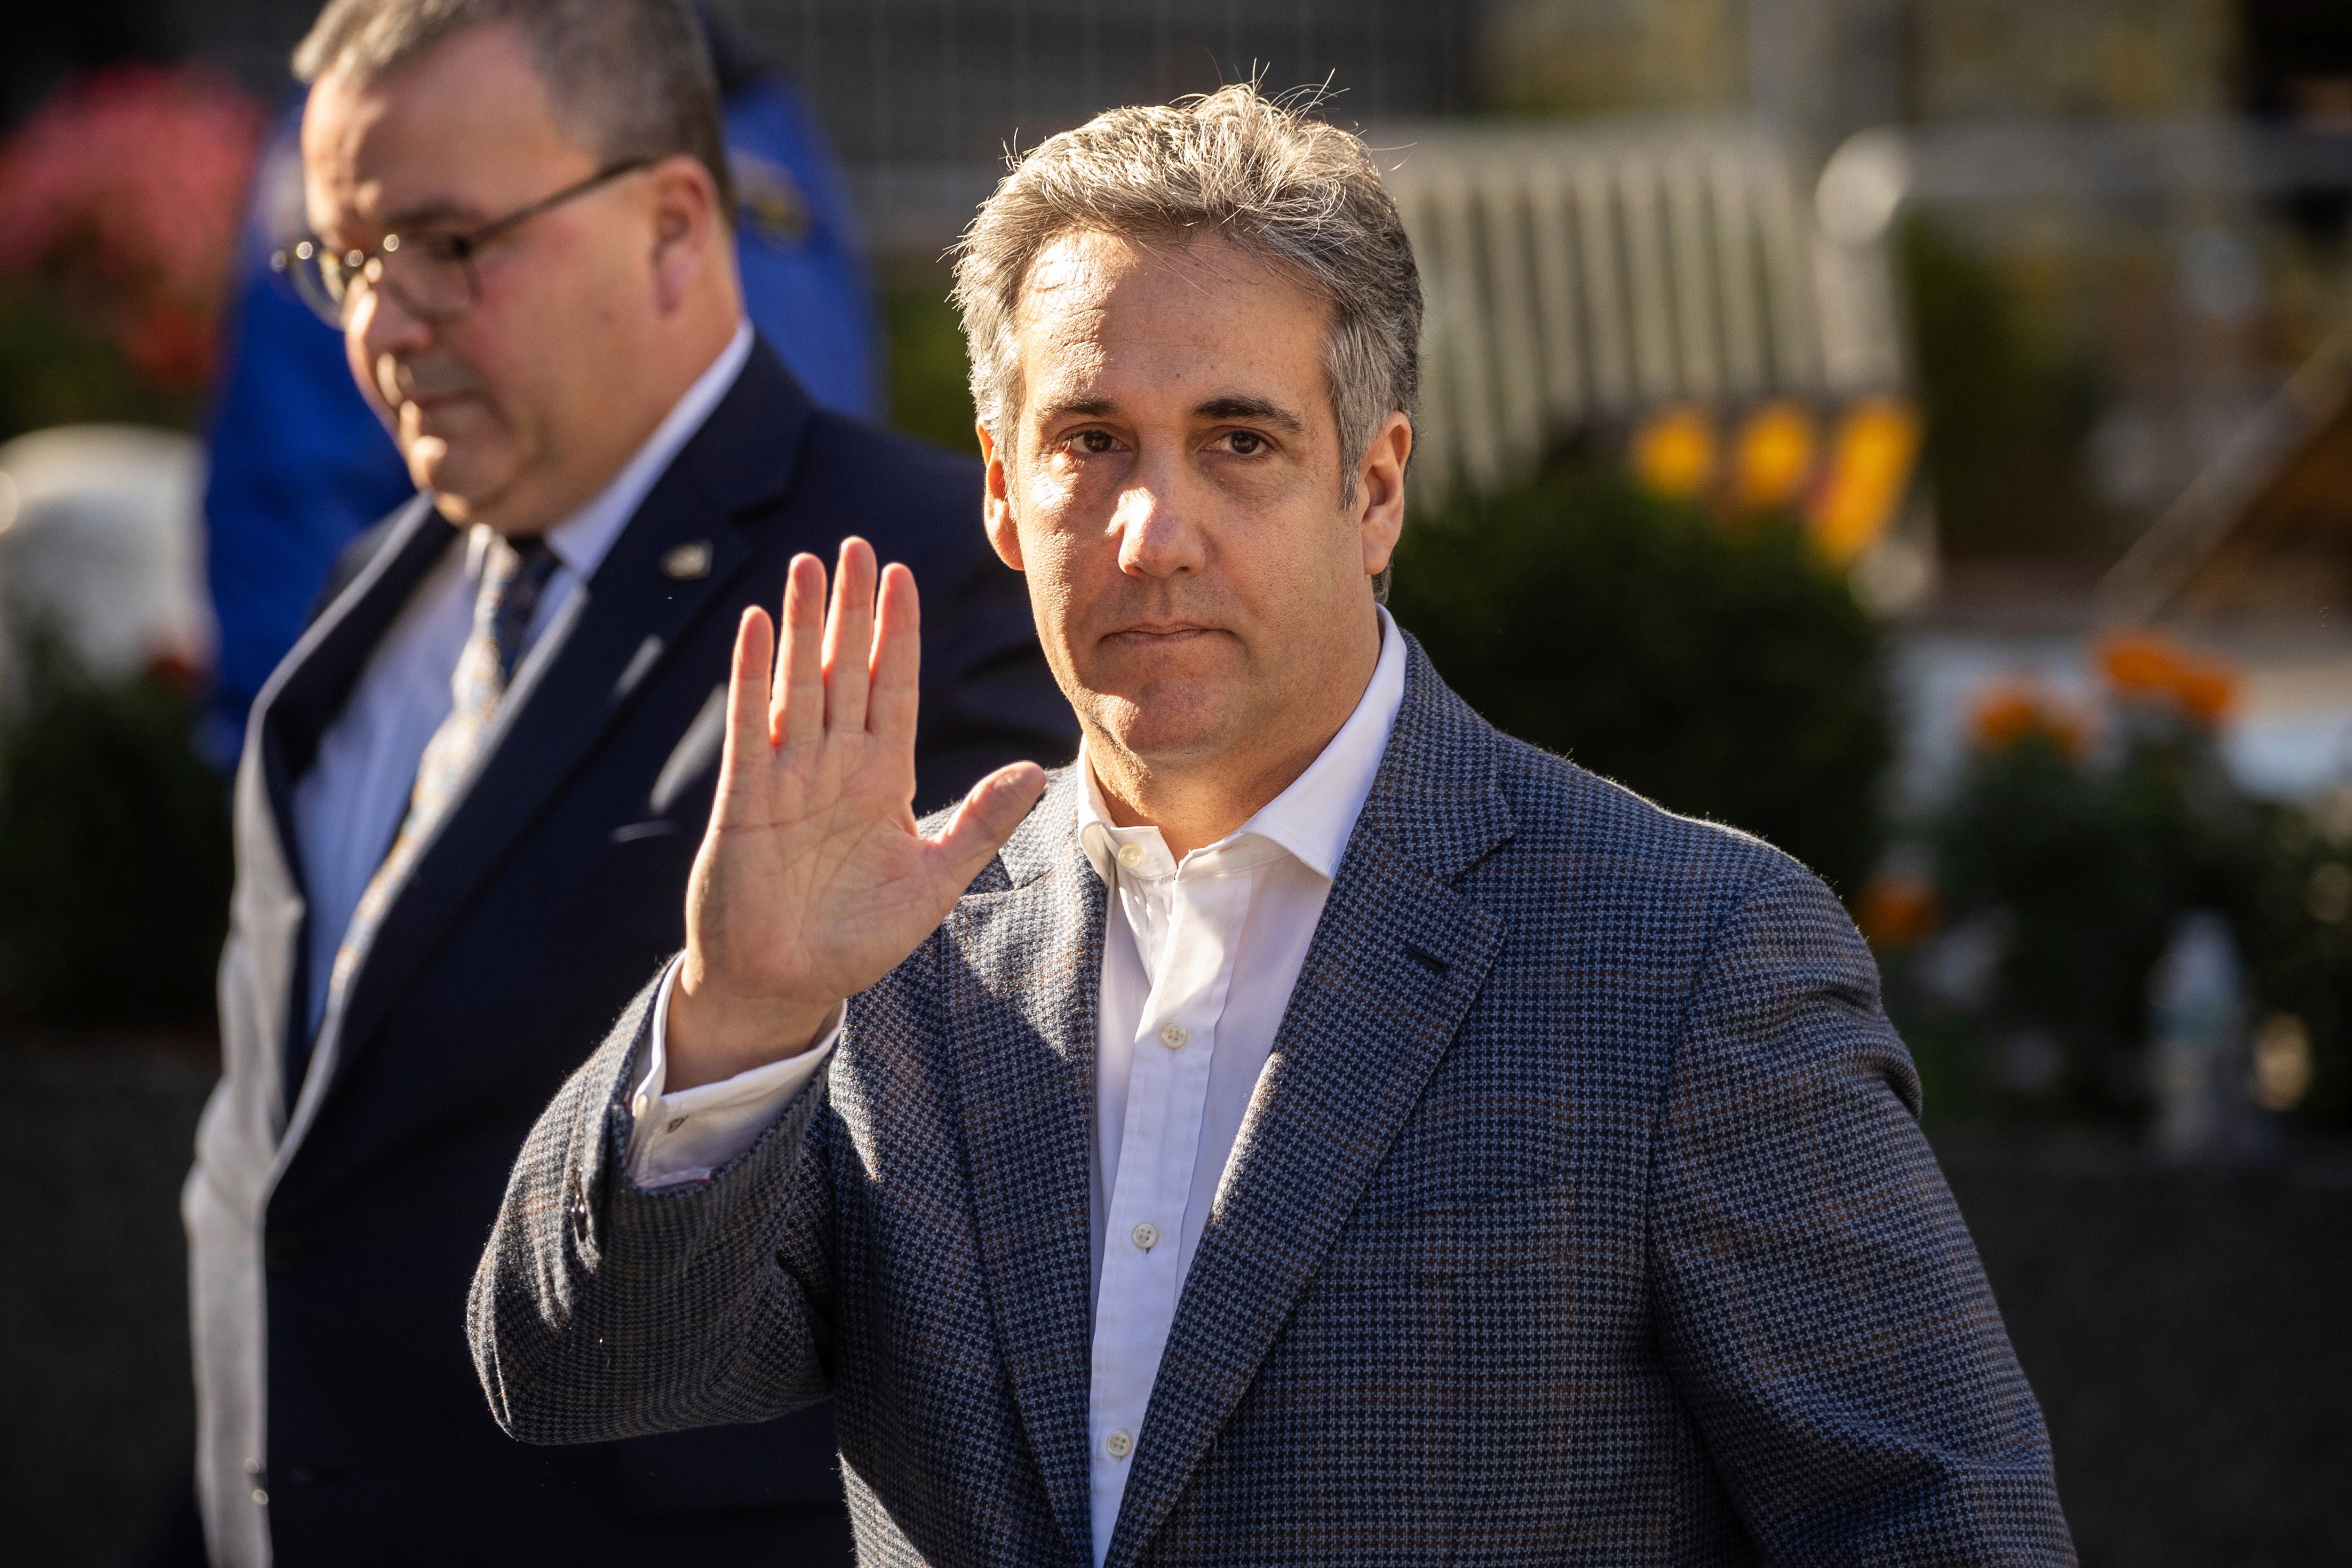 Michael Cohen arrives at New York Supreme Court in lower Manhattan on 24 October to testify in a civil fraud trial targeting Donald Trump’s business empire.